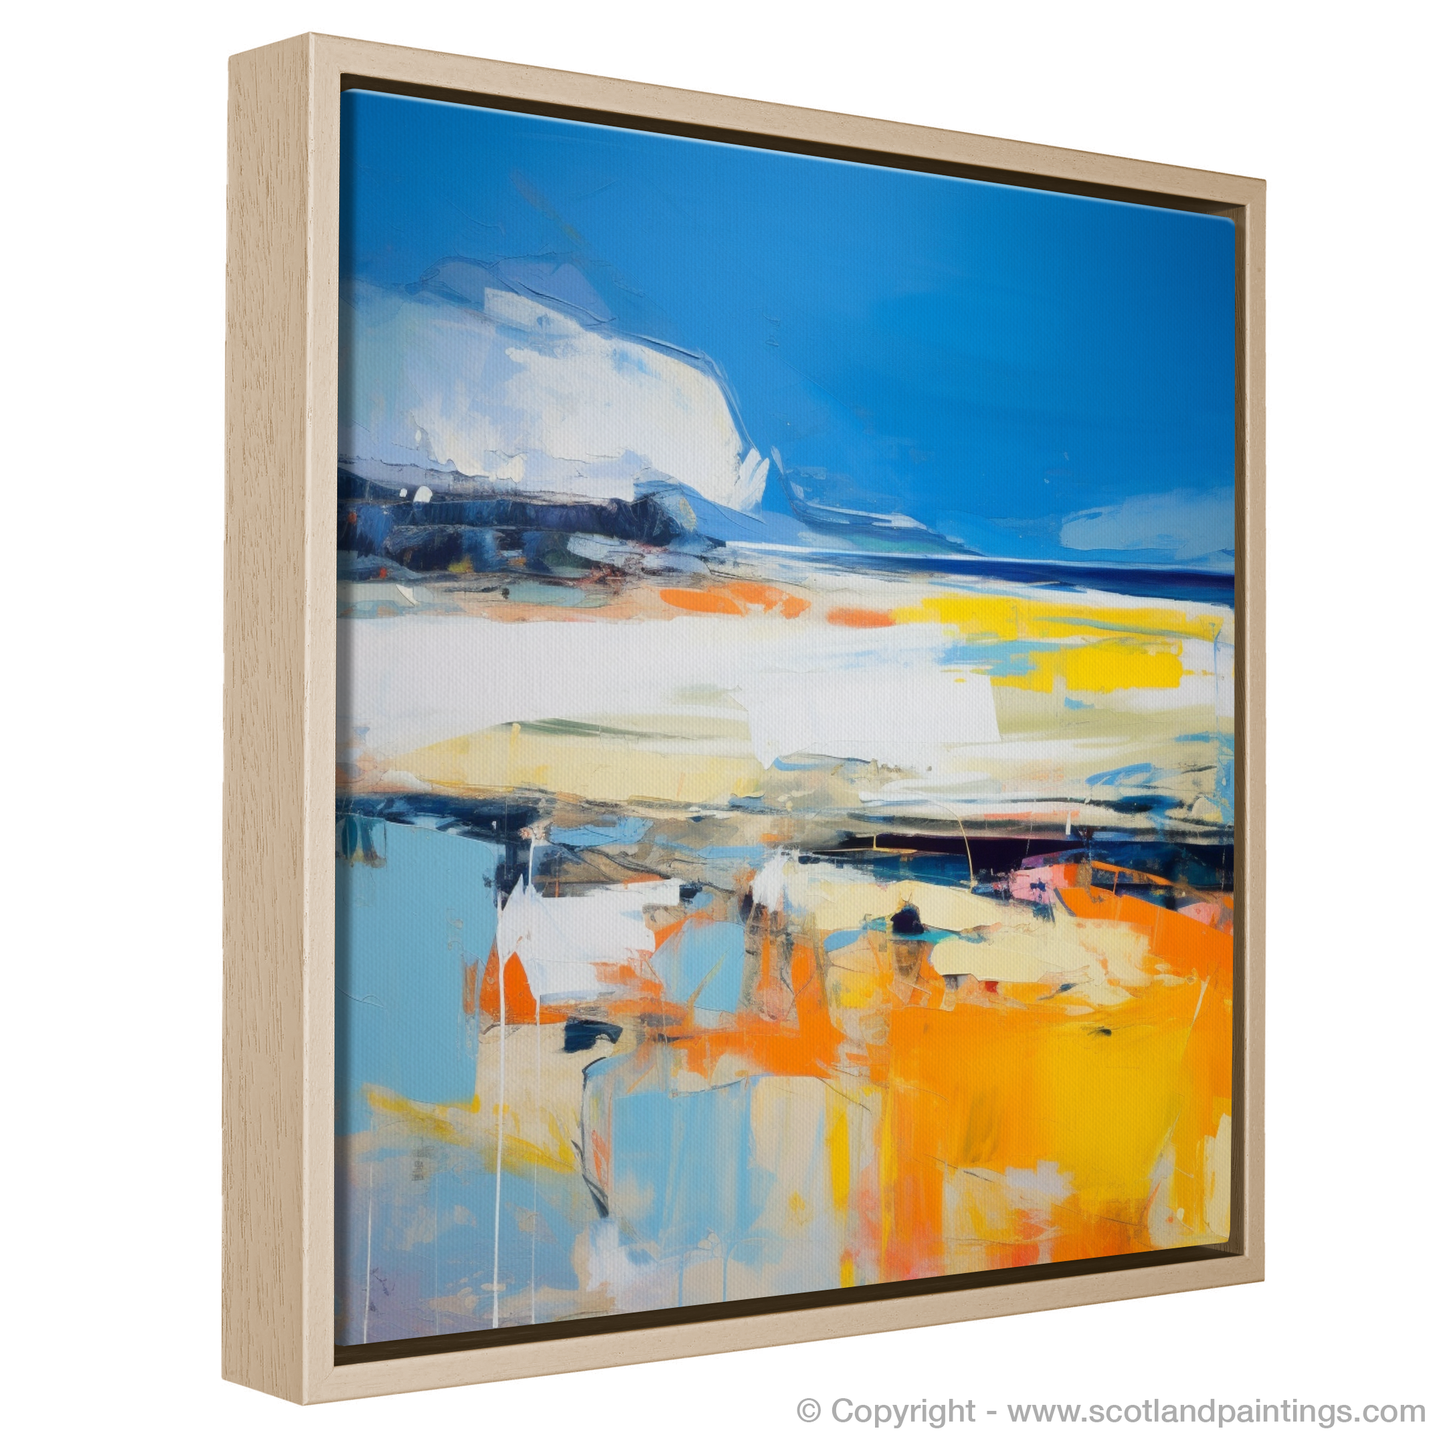 West Sands Whispers: An Abstract Expressionist Ode to Scottish Shores